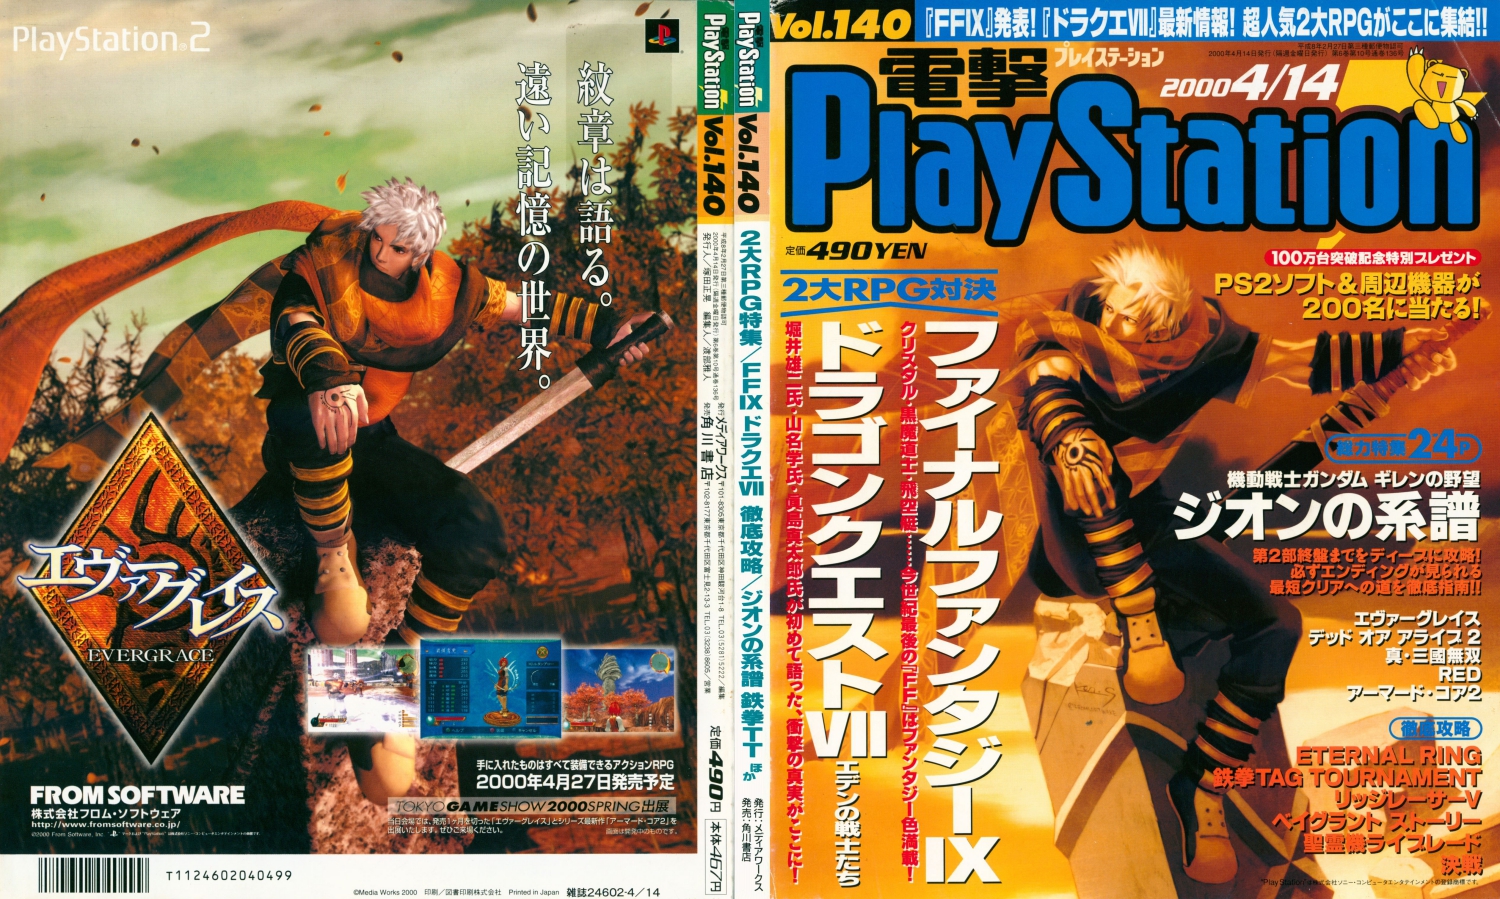 dengeki playstation magazine cover with an illustration of darius from evergrace and a render of him for a print ad on the back as well. in both pics he's doing the same pose of 'sitting on rock with sword jutting out'